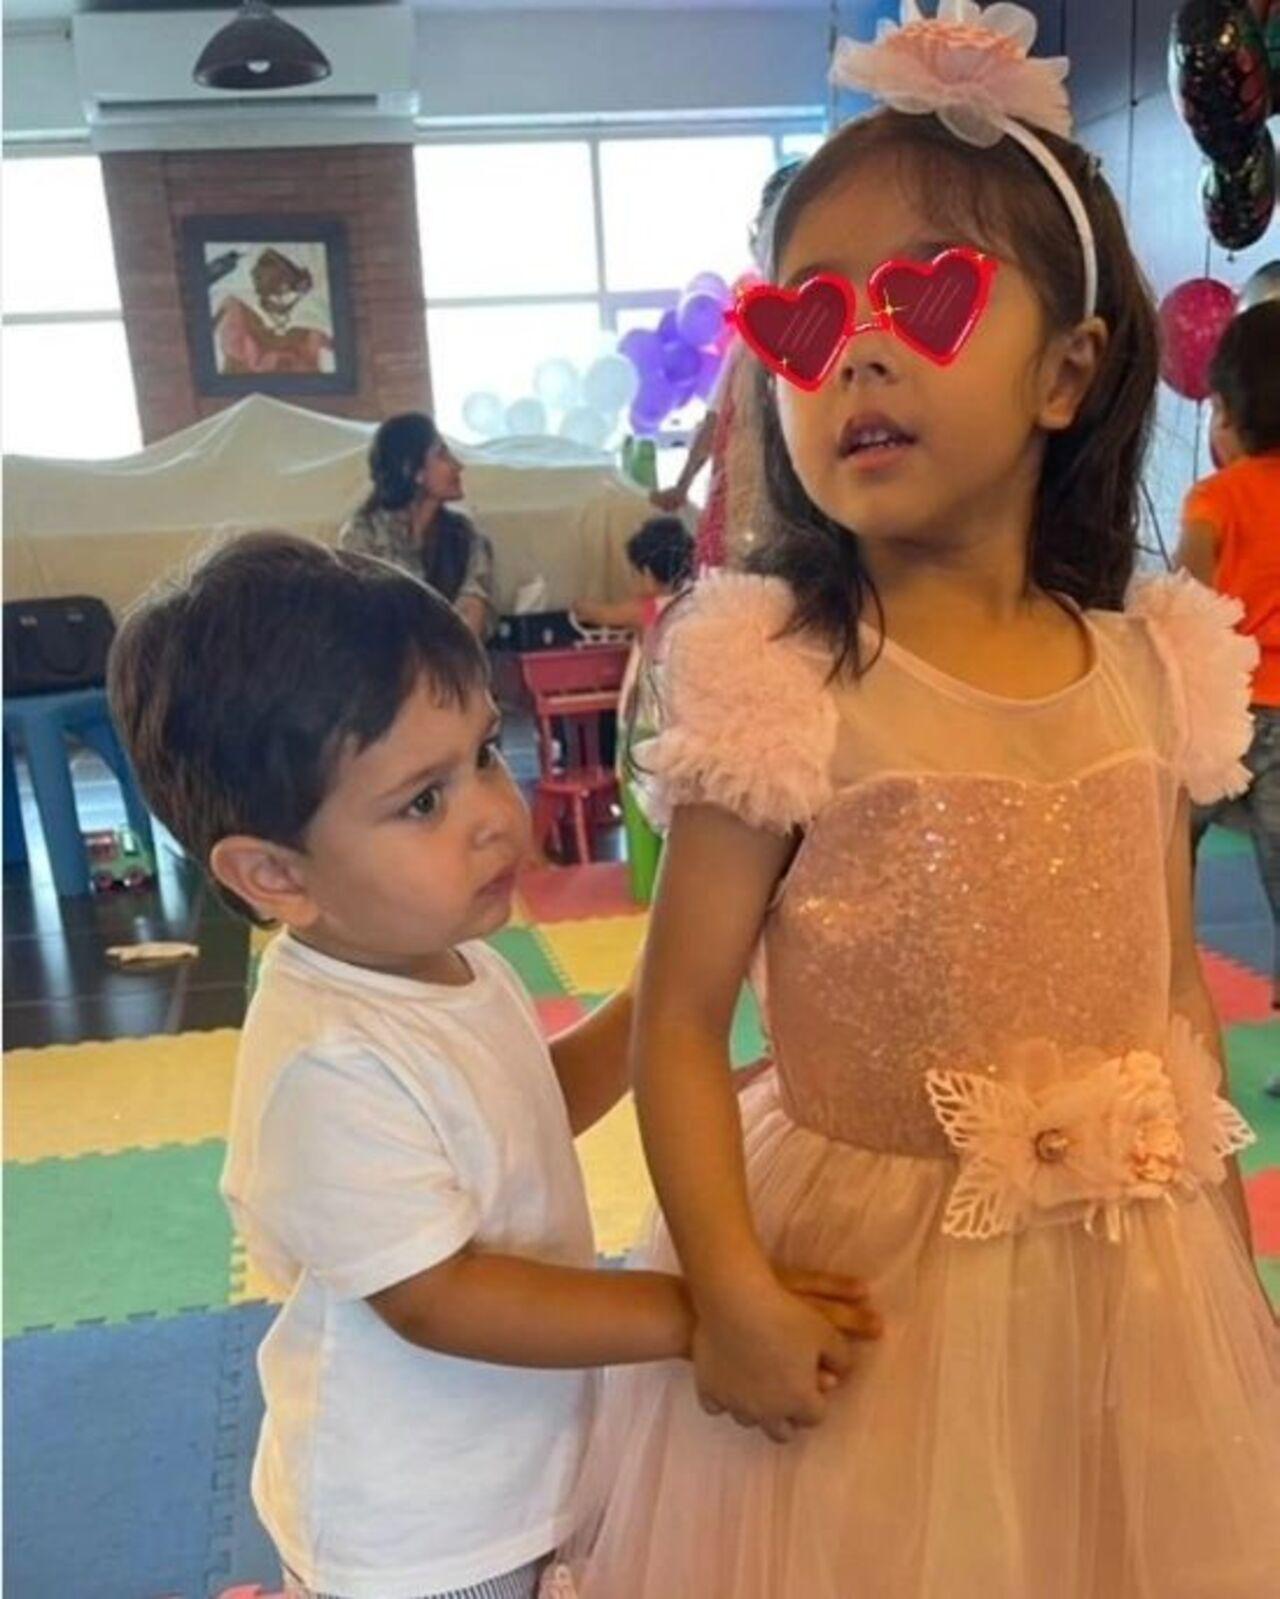 Inaaya Naumi Kemmu and her younger cousin brother Jeh Ali Khan had each other's company at a party